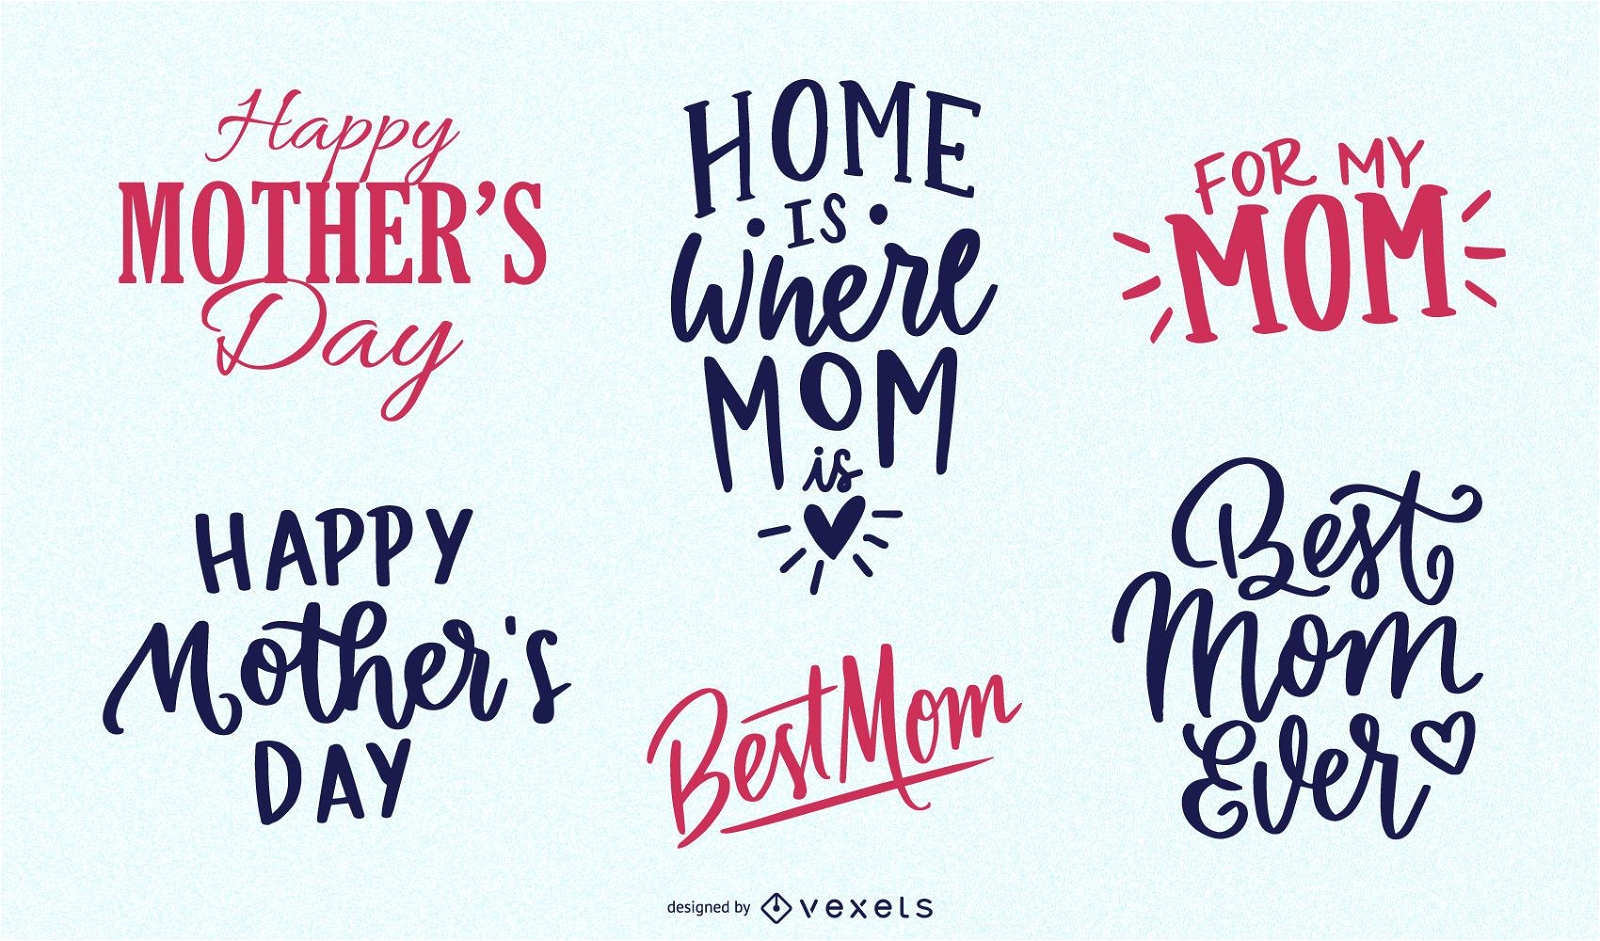 Mother's Day Vintage Message Pack